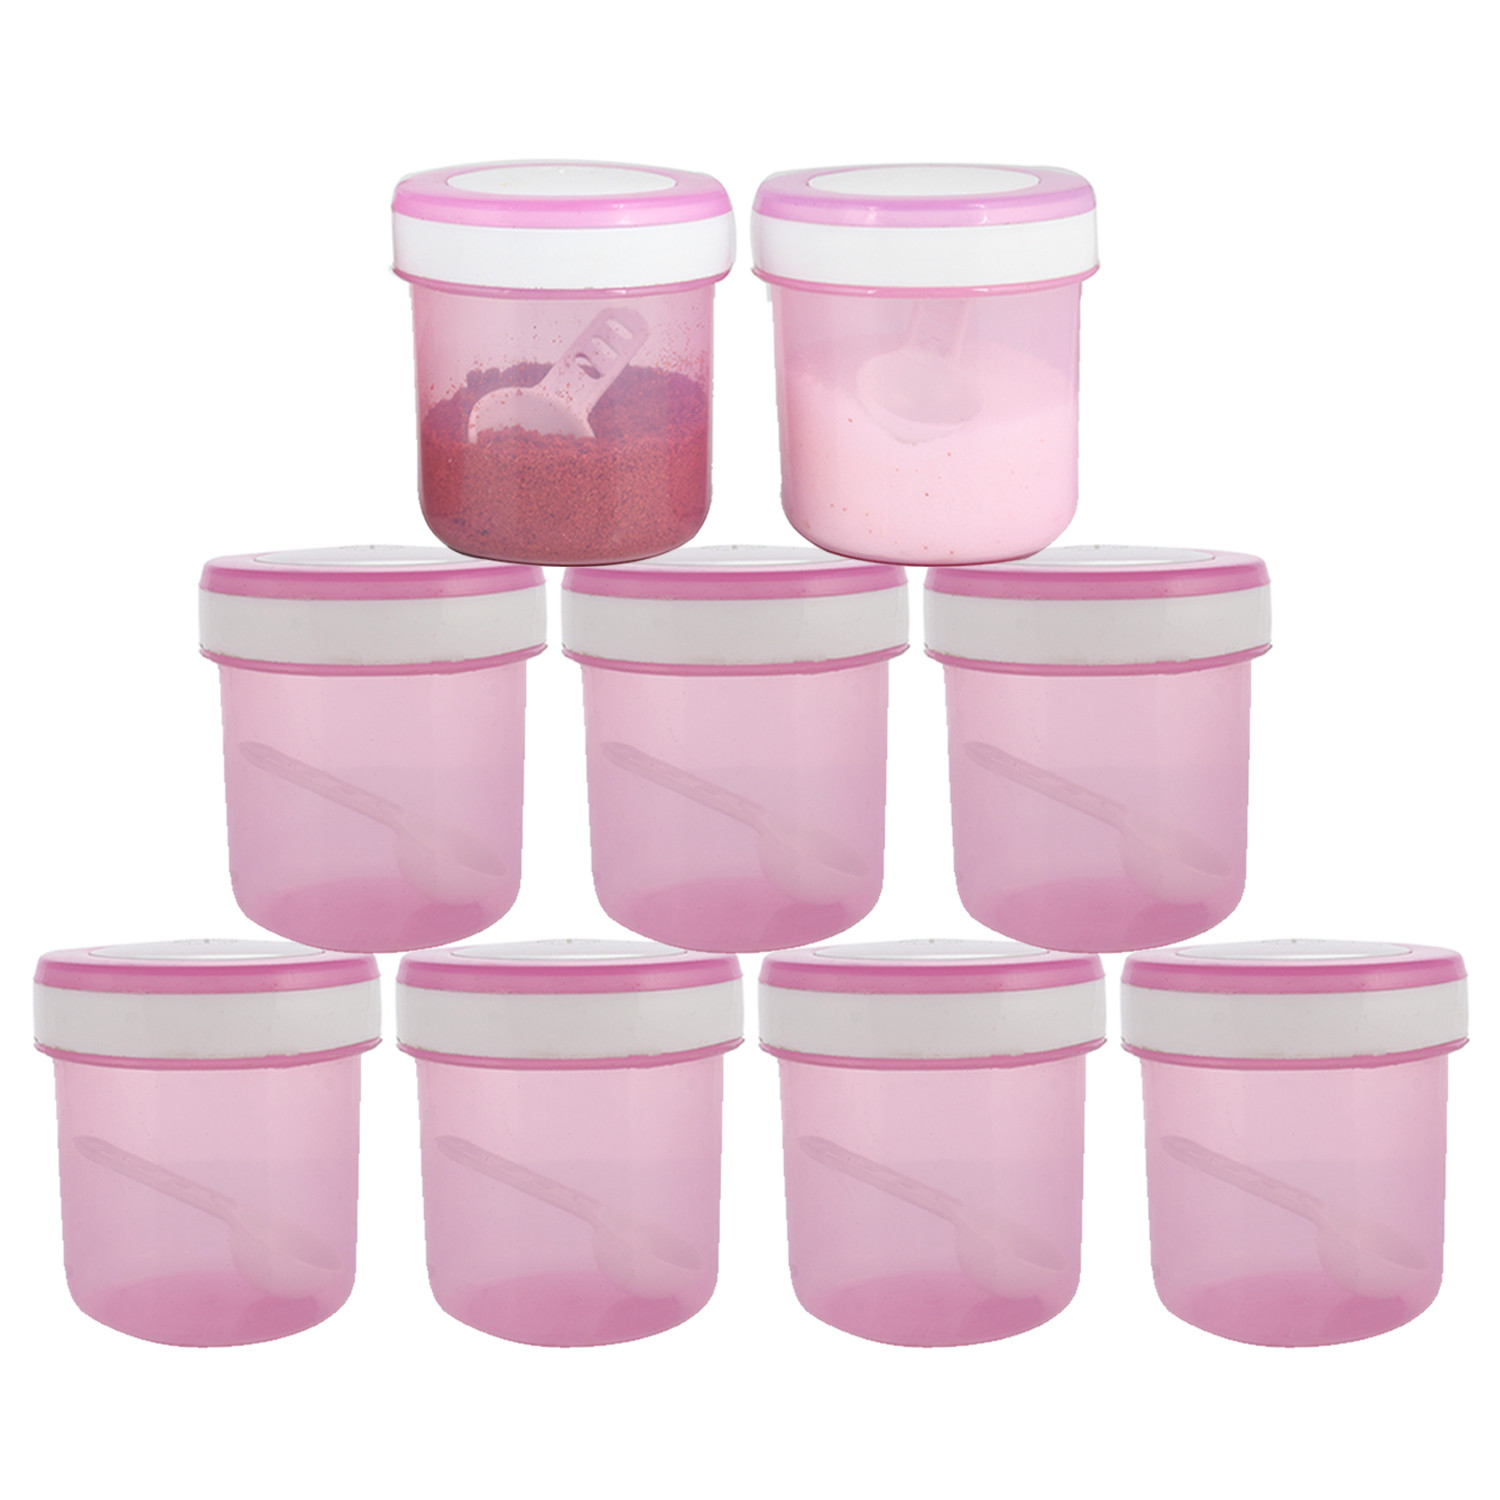 Kuber Industries Containers Set for Kitchen|BPA-Free Plastic Storage Containers Set|Kitchen Storage Containers|Grocery Containers with Spoon|SPICY 1100 ML|(Pink)